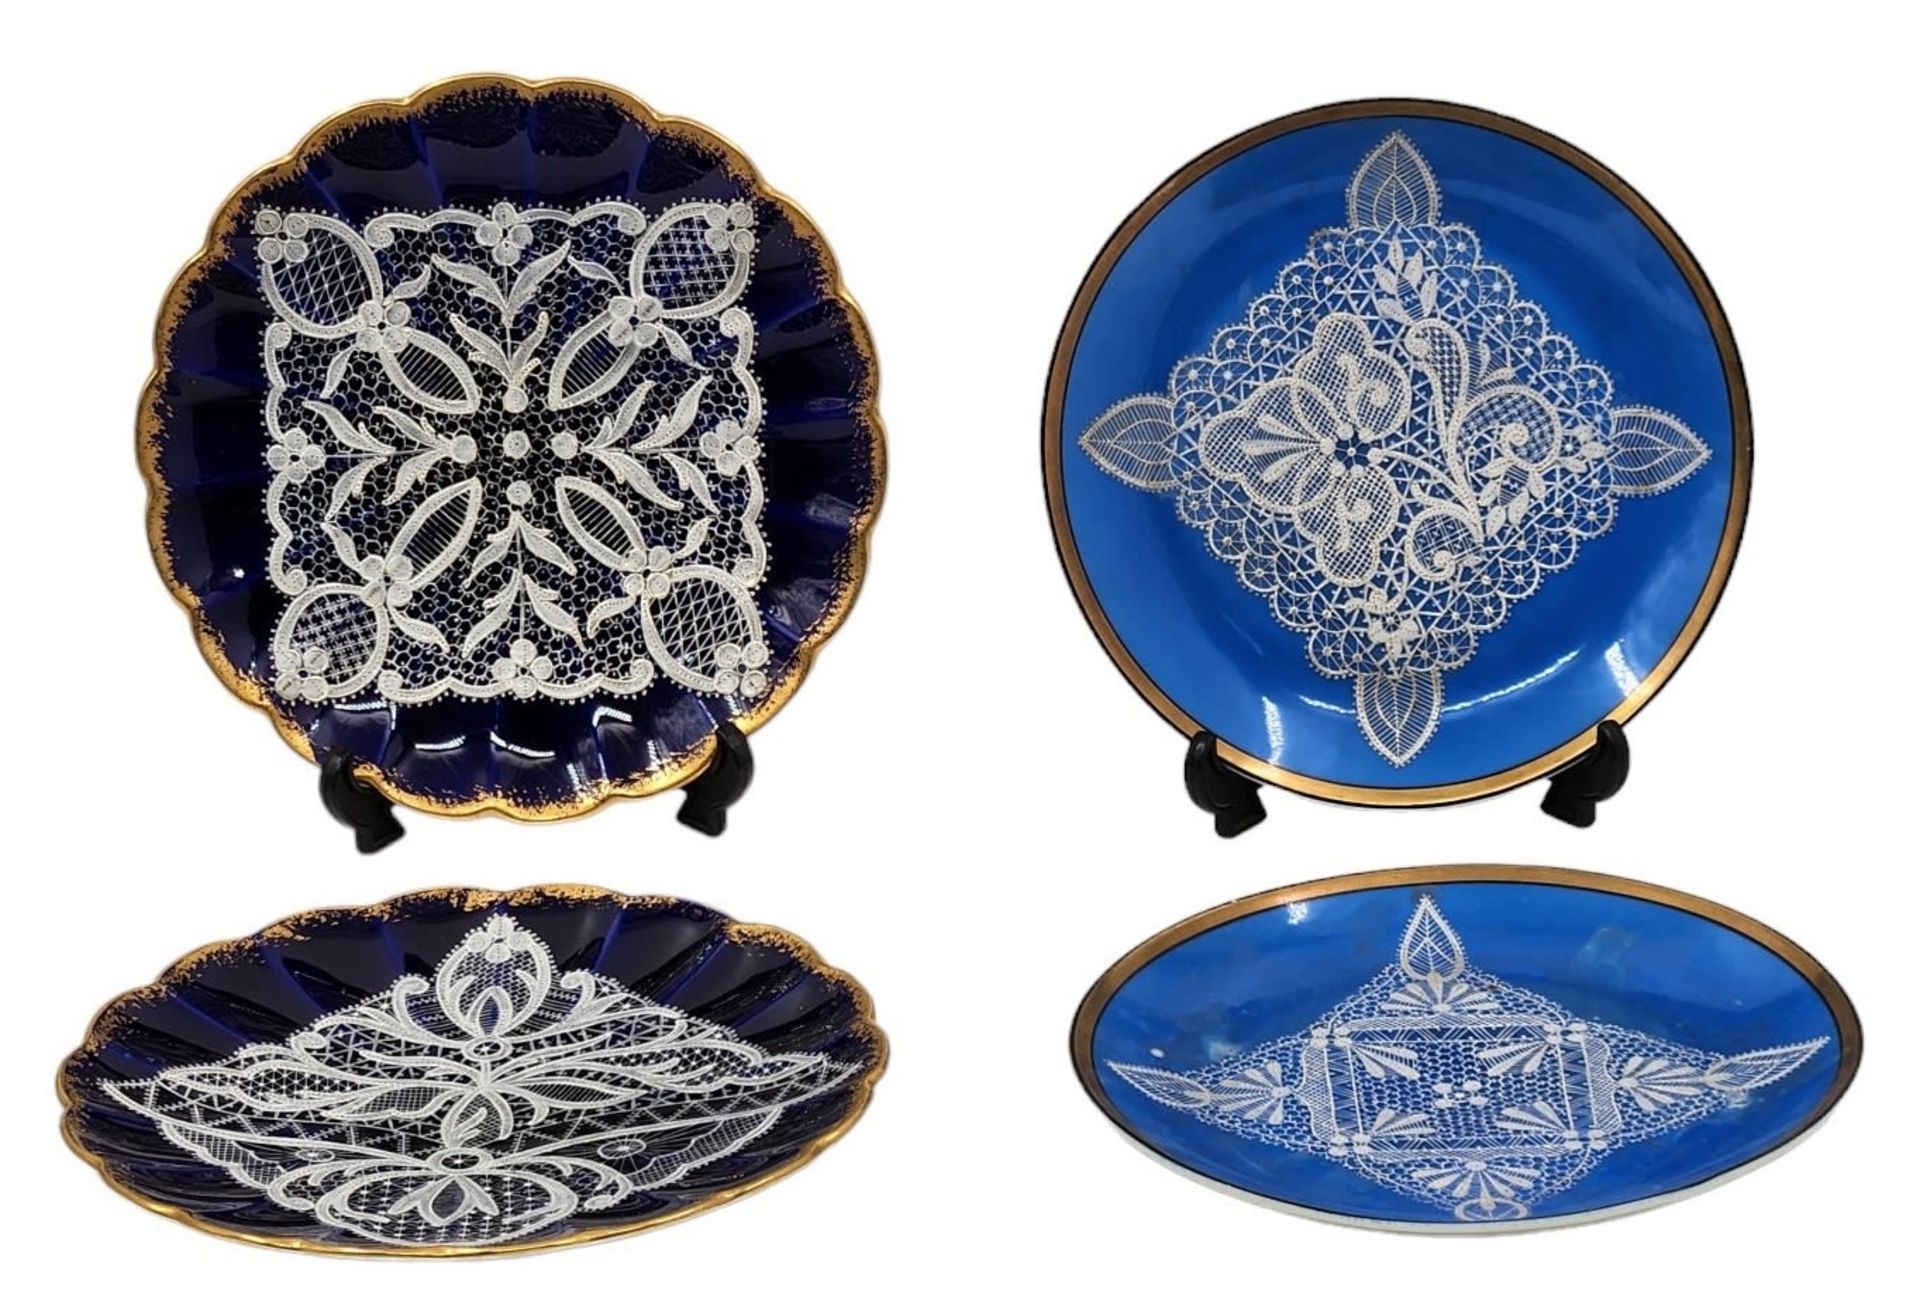 4 porcelain plates, decorated with white enamel in a lace napkin pattern and a gold saying on blue - Image 3 of 5